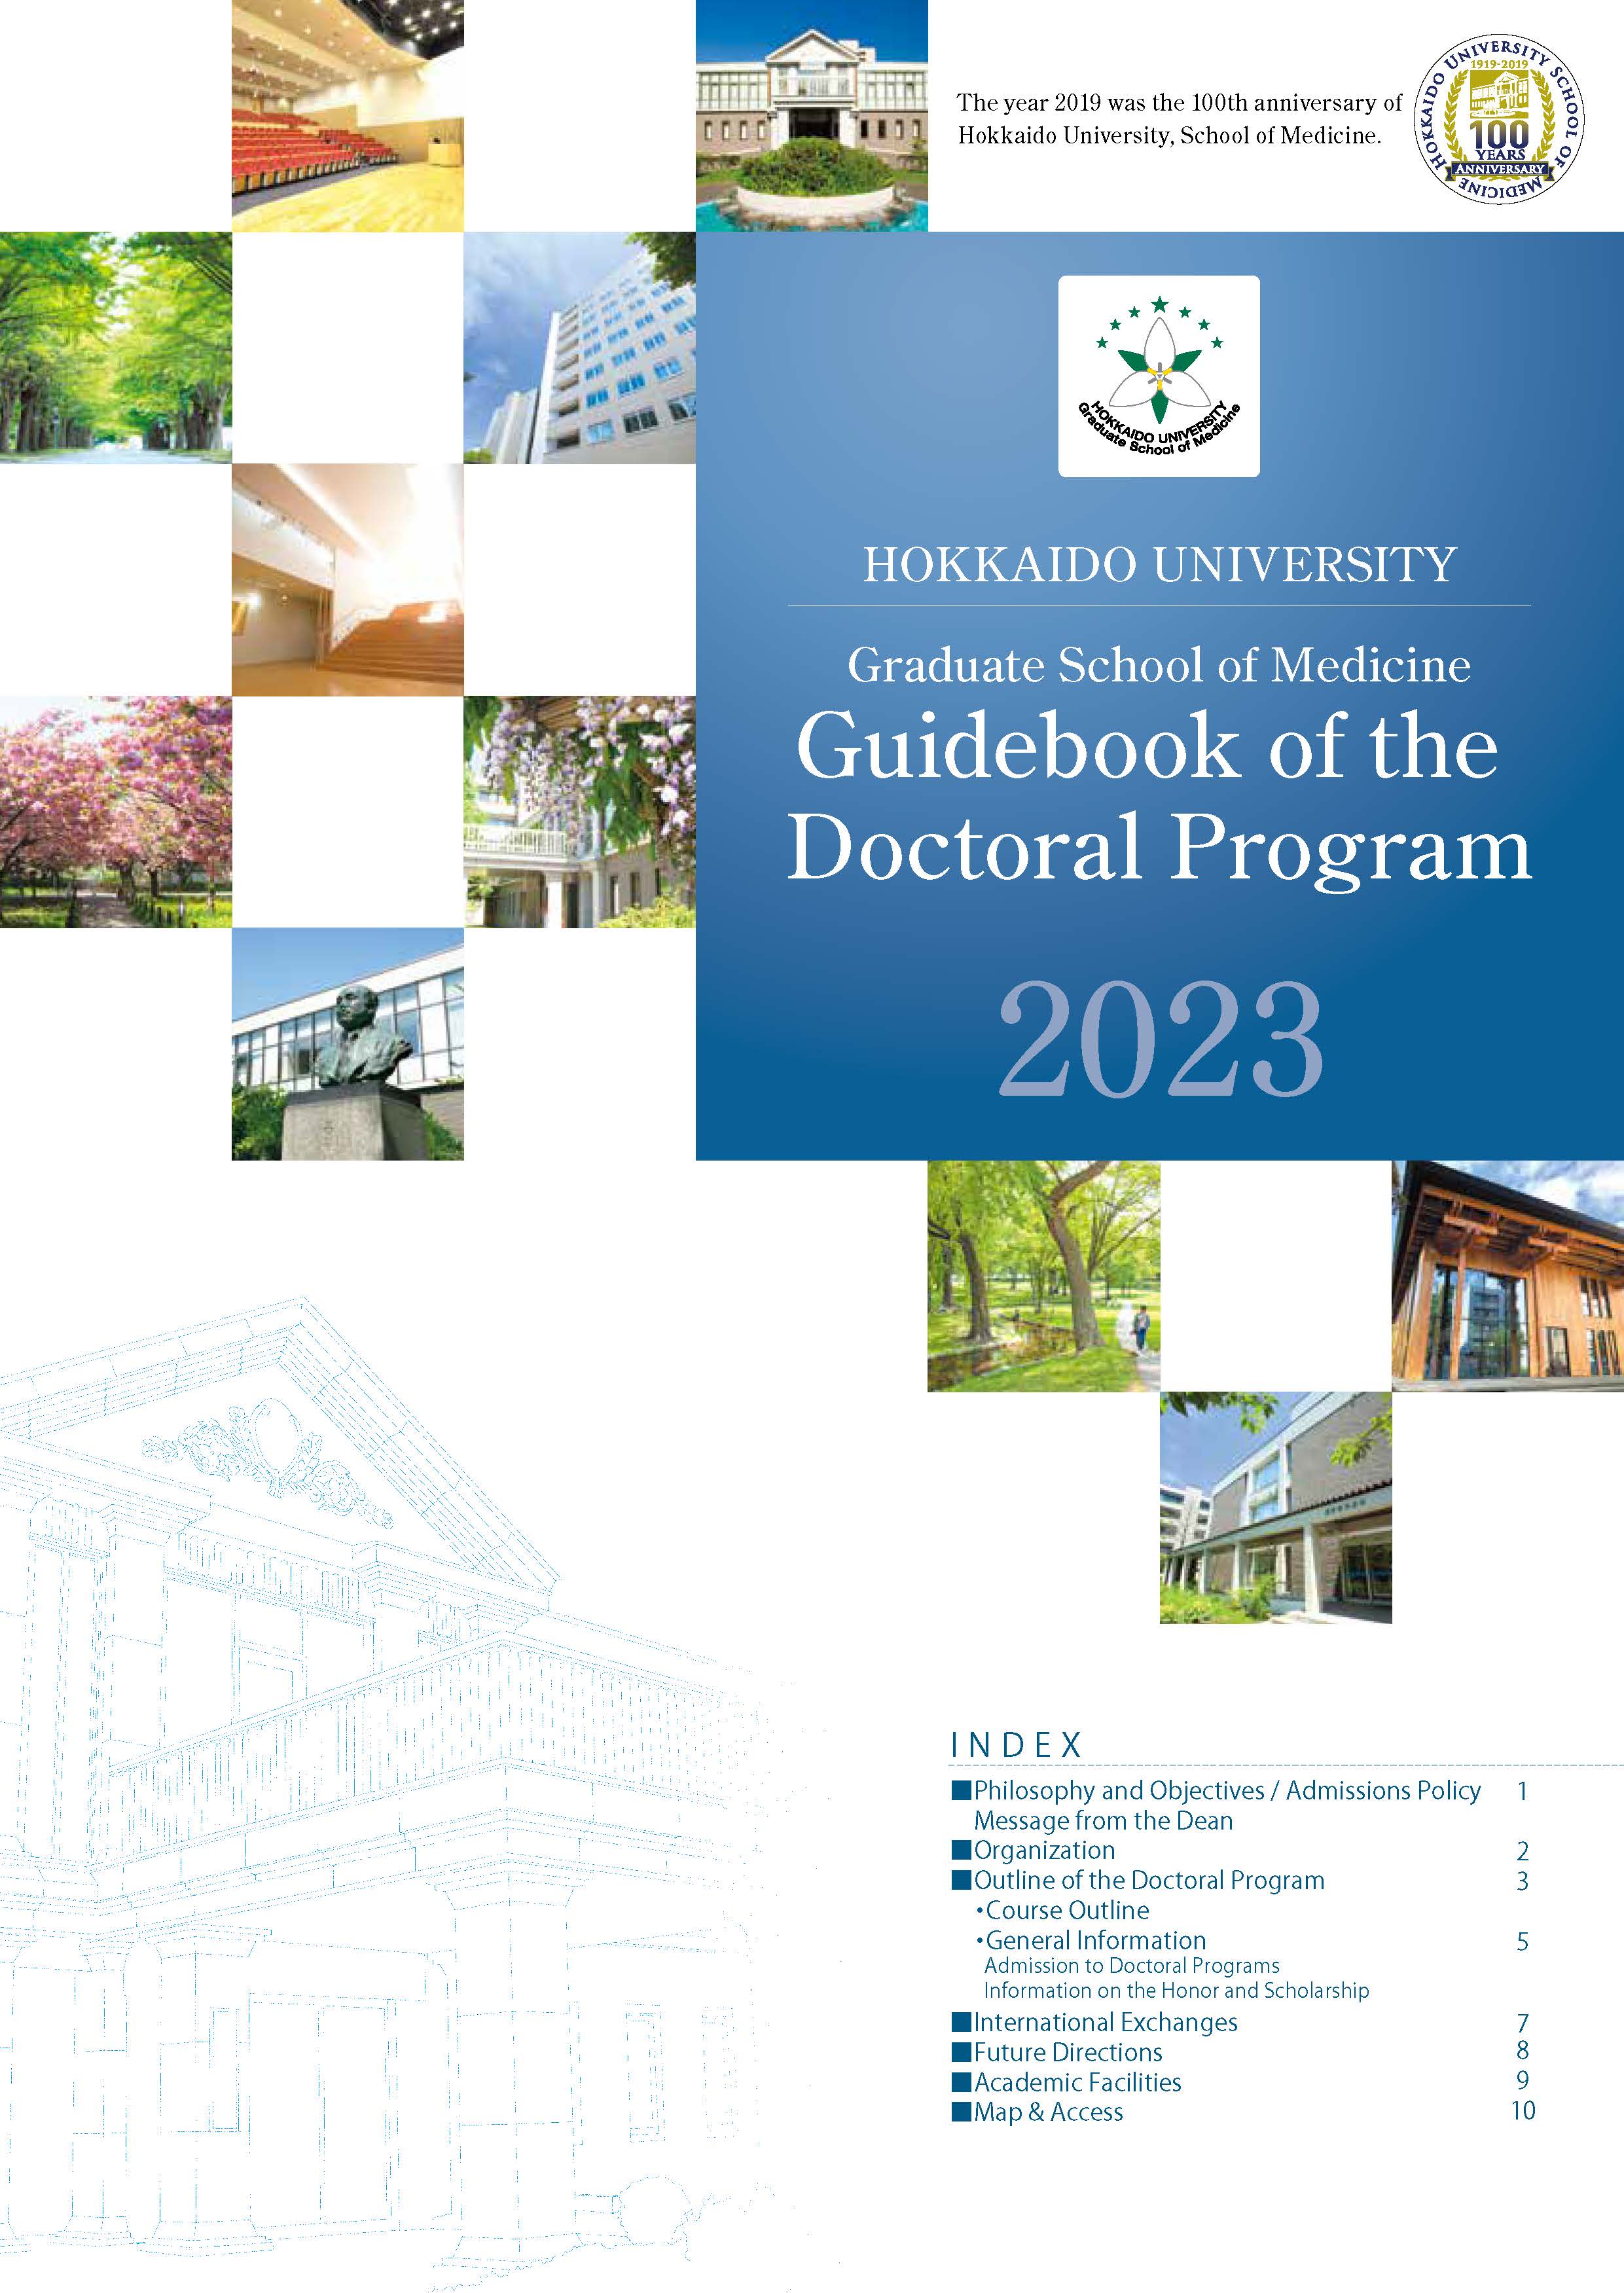 Guidebook of the Doctoral Program